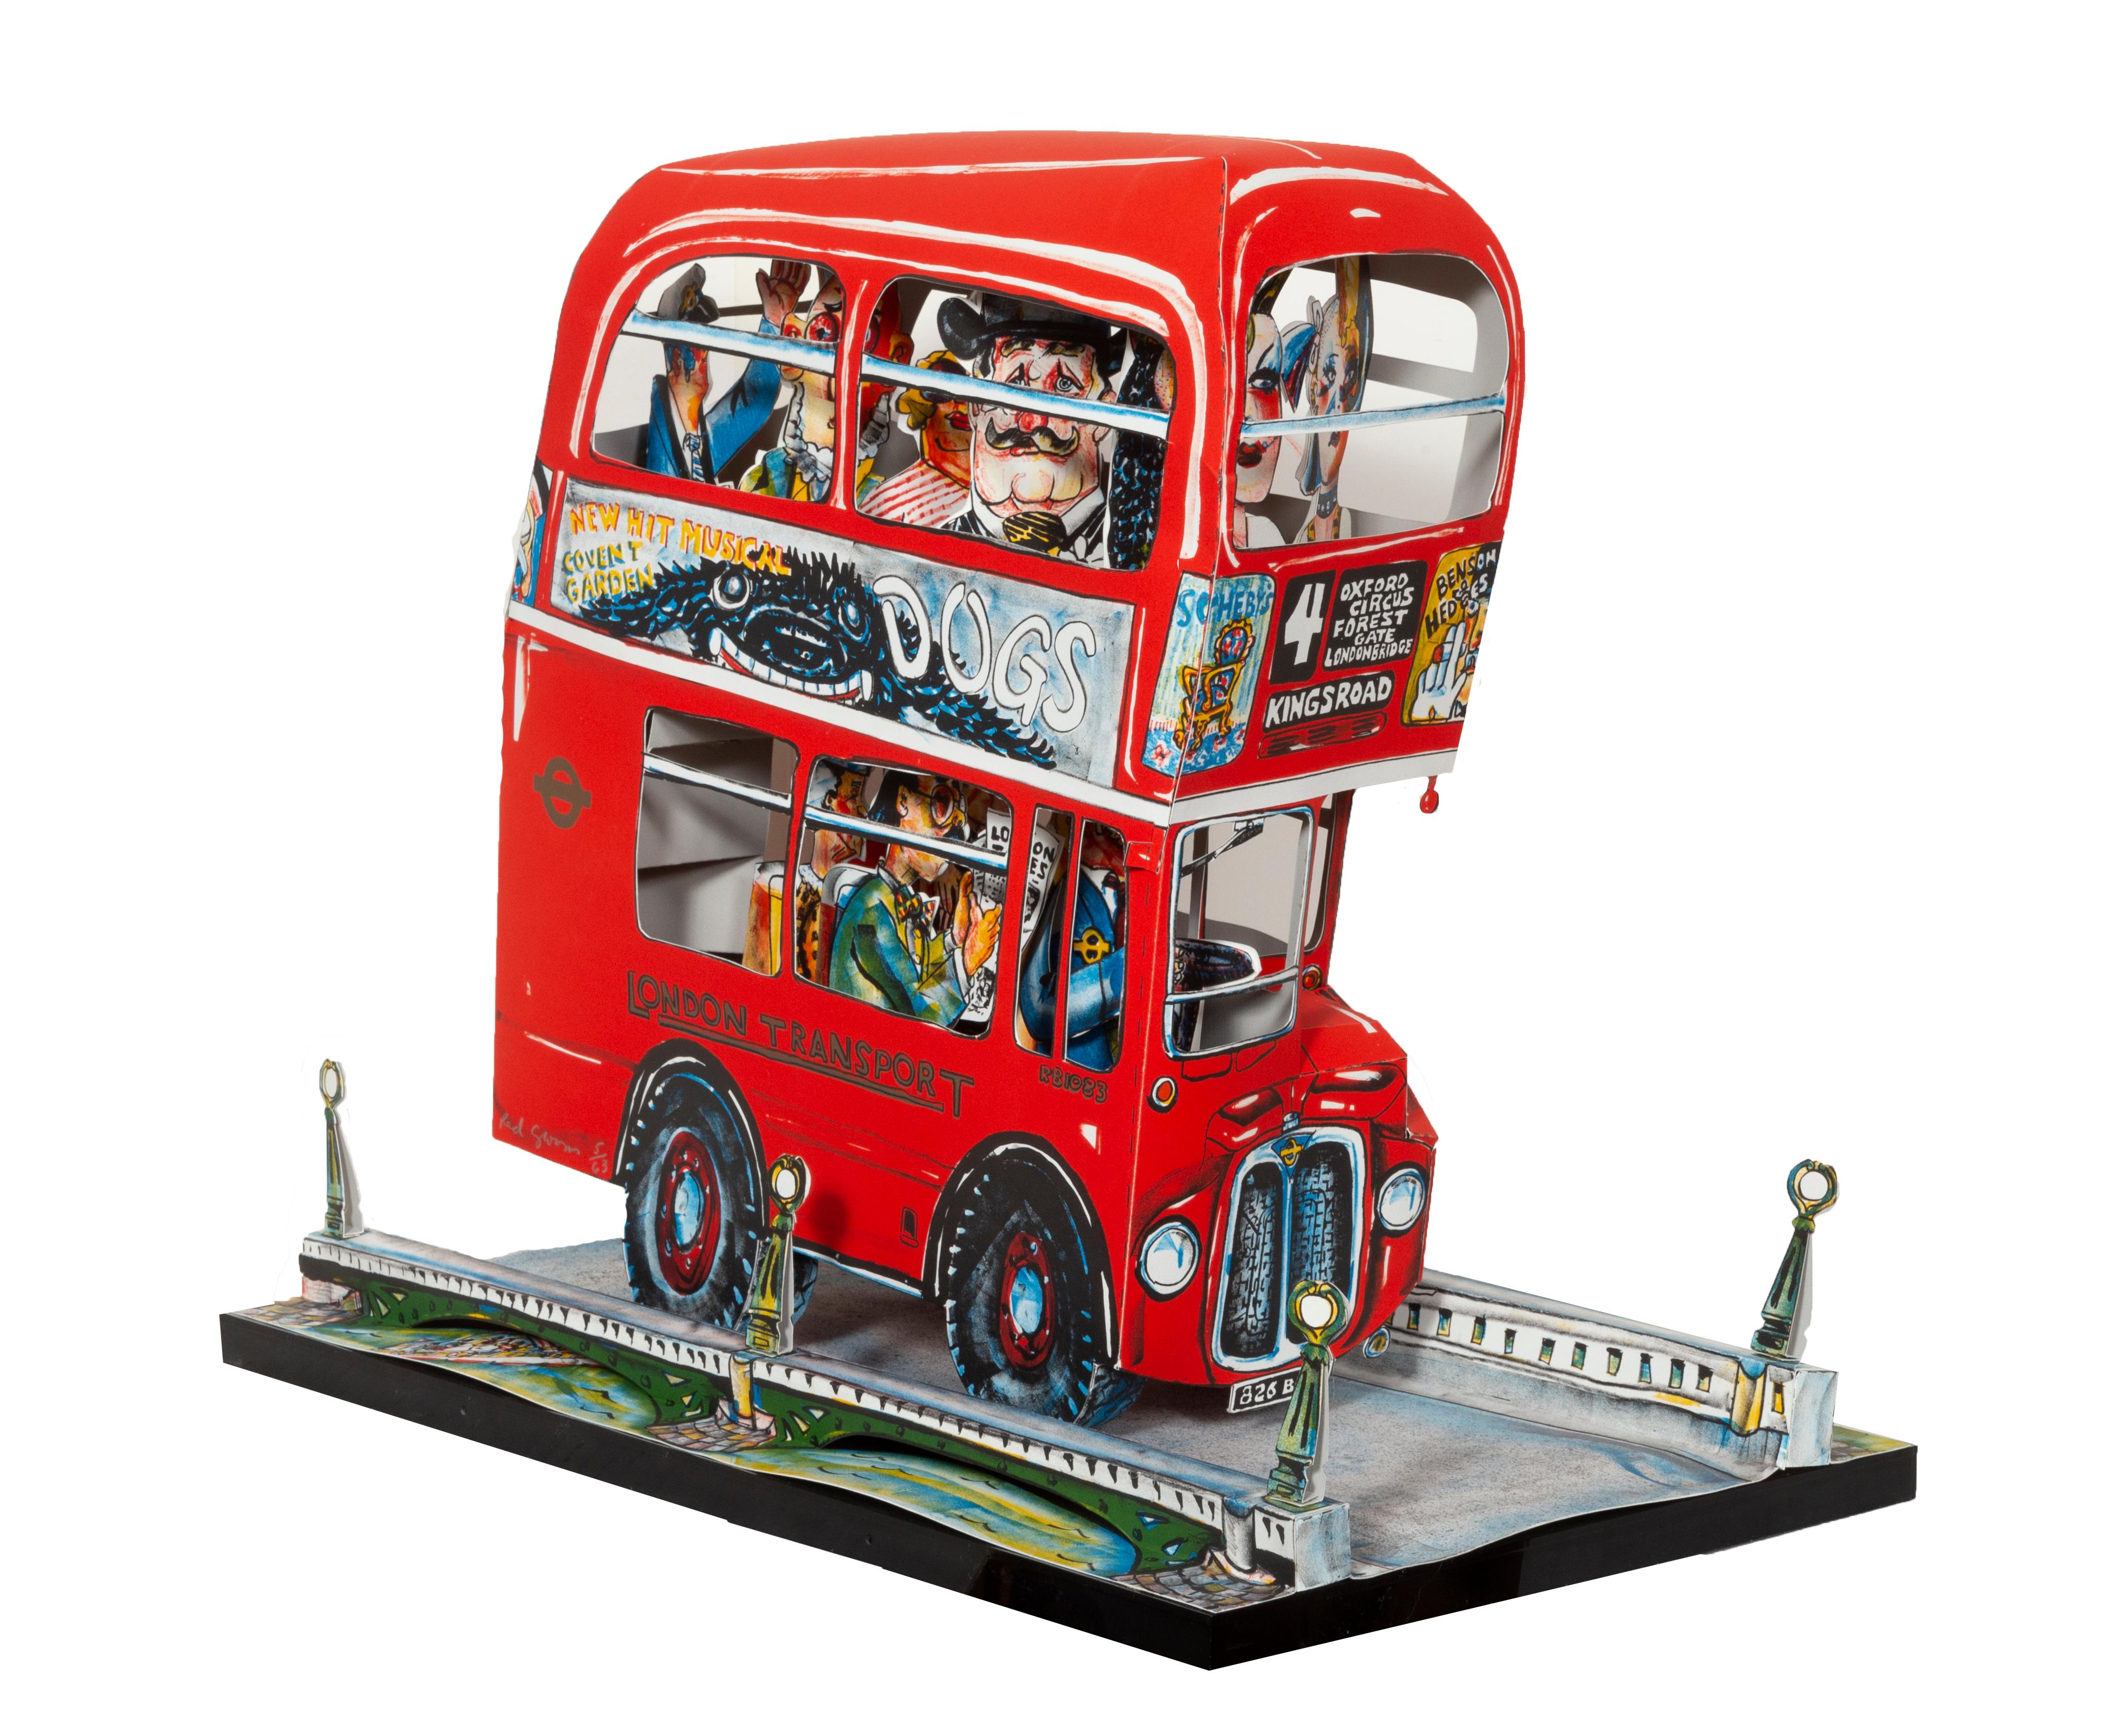 London Bus, 3-D Lithograph Sculpture by Red Grooms 